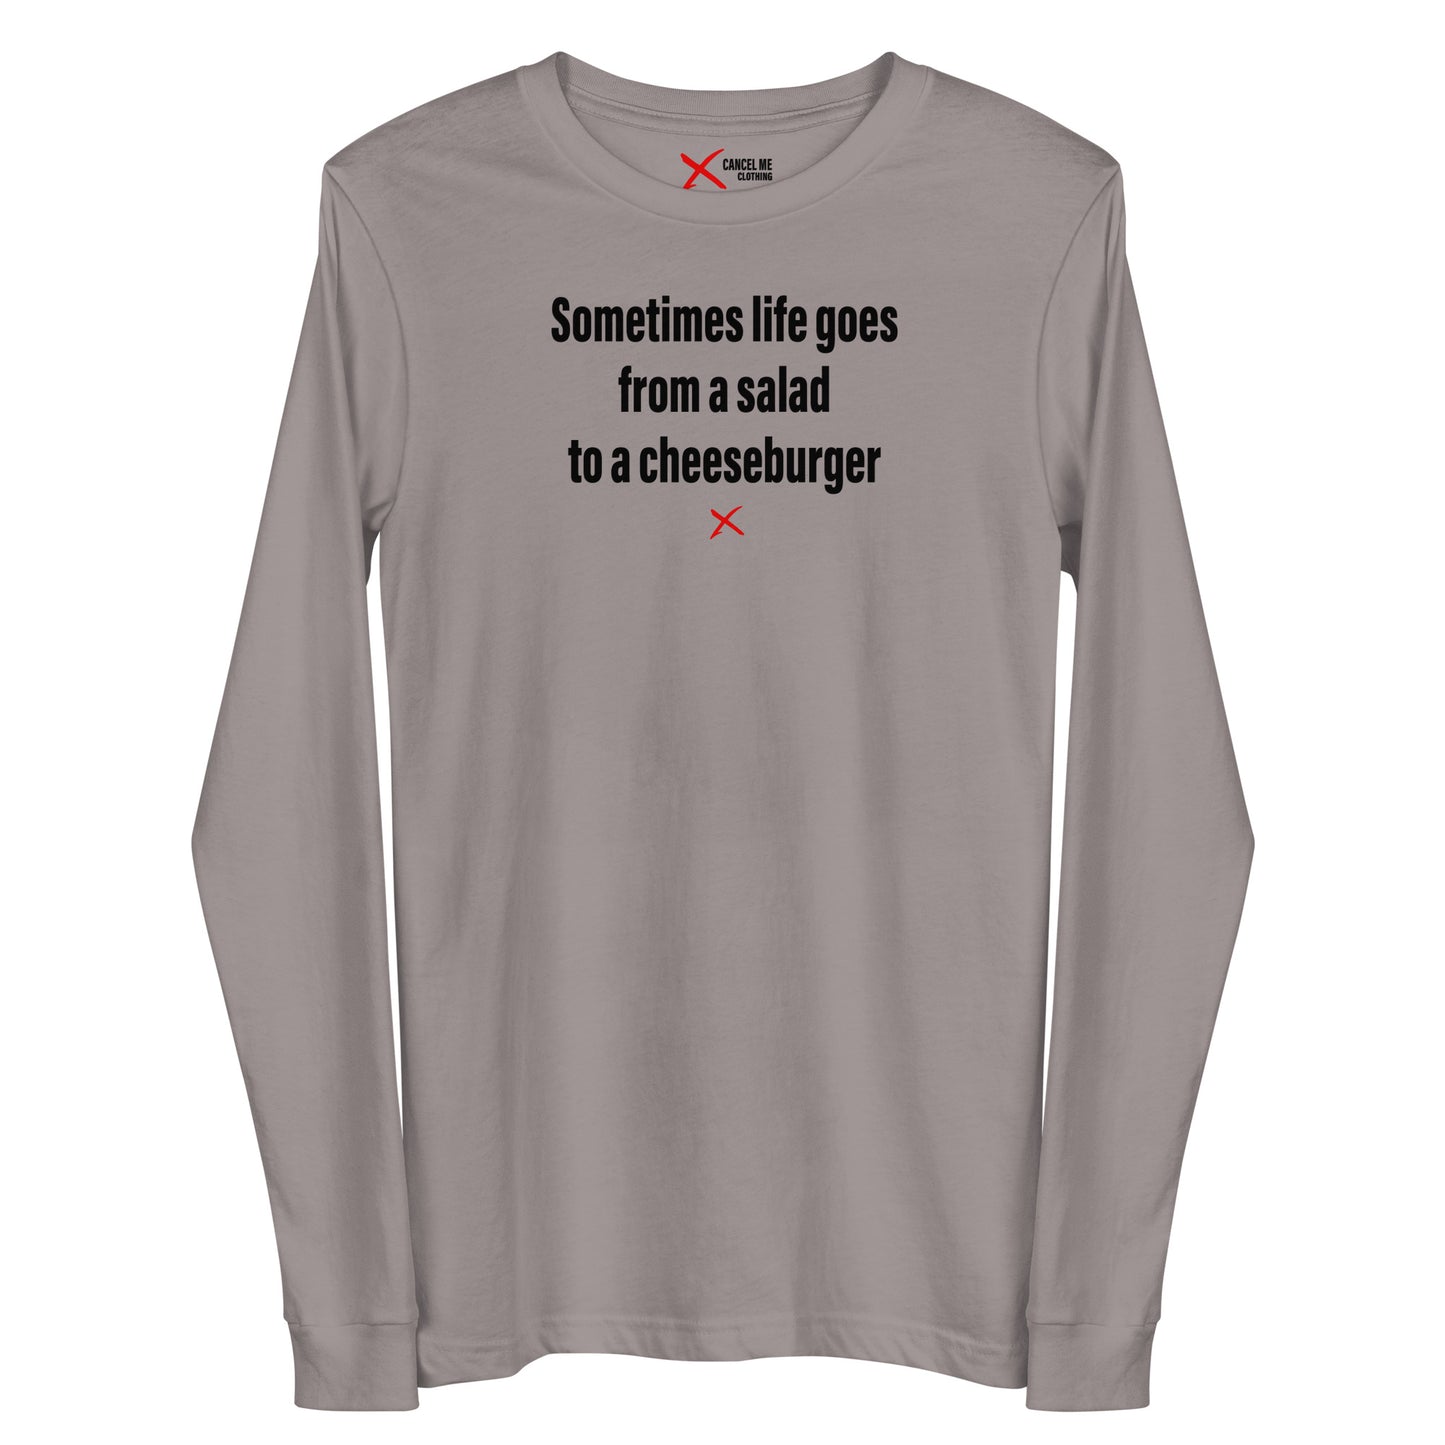 Sometimes life goes from a salad to a cheeseburger - Longsleeve